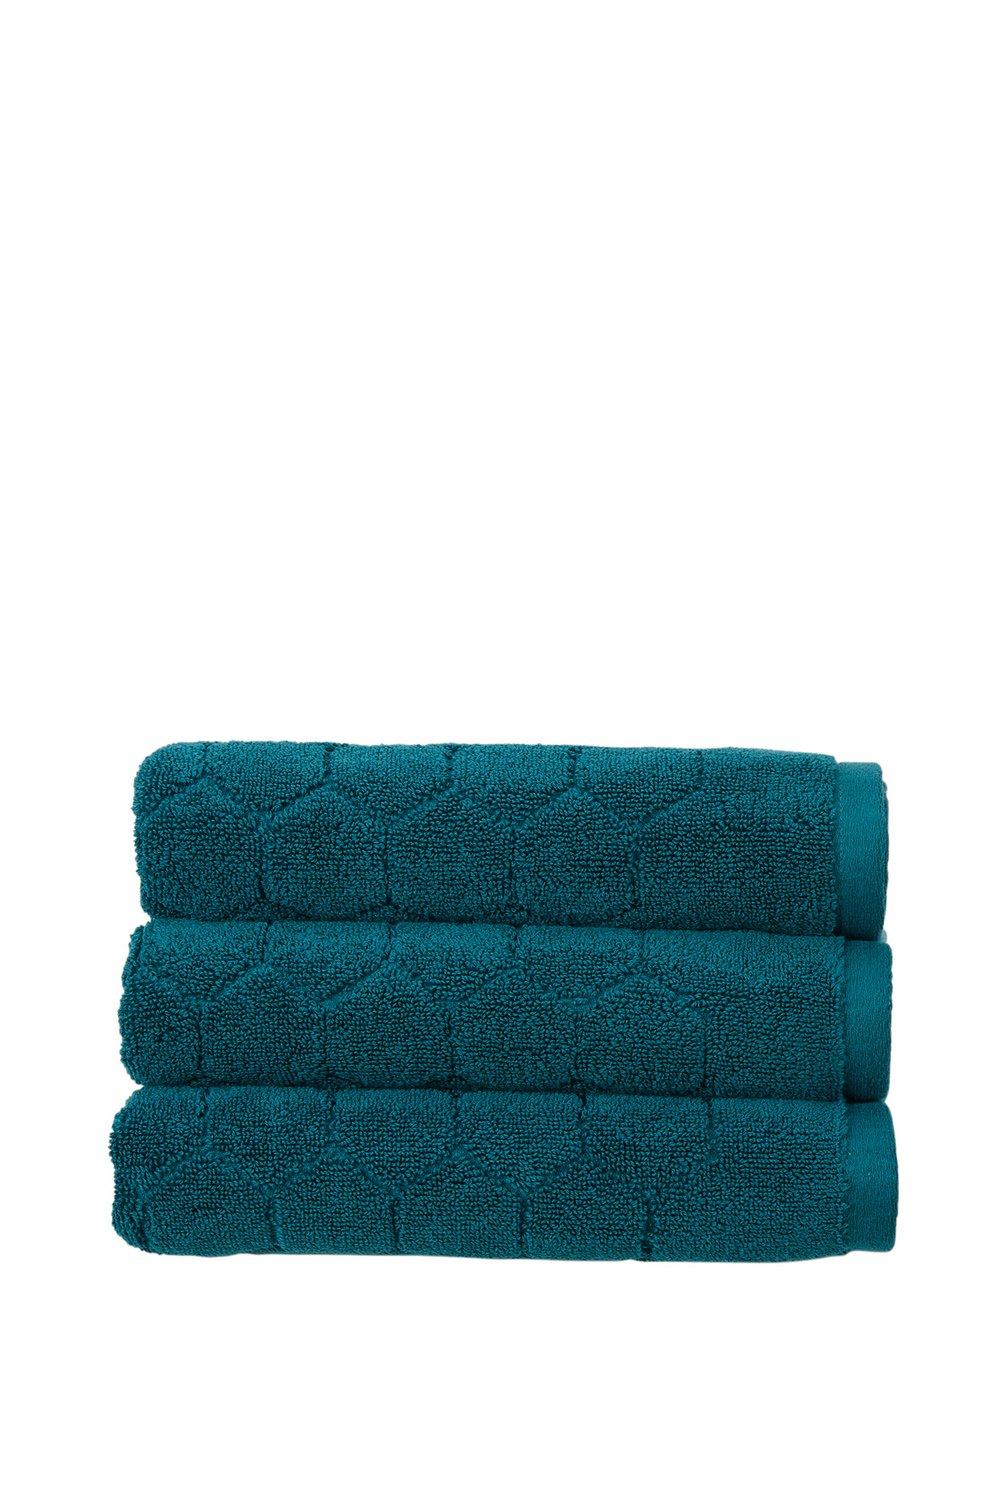 Picture of Honeycomb Bath Towel